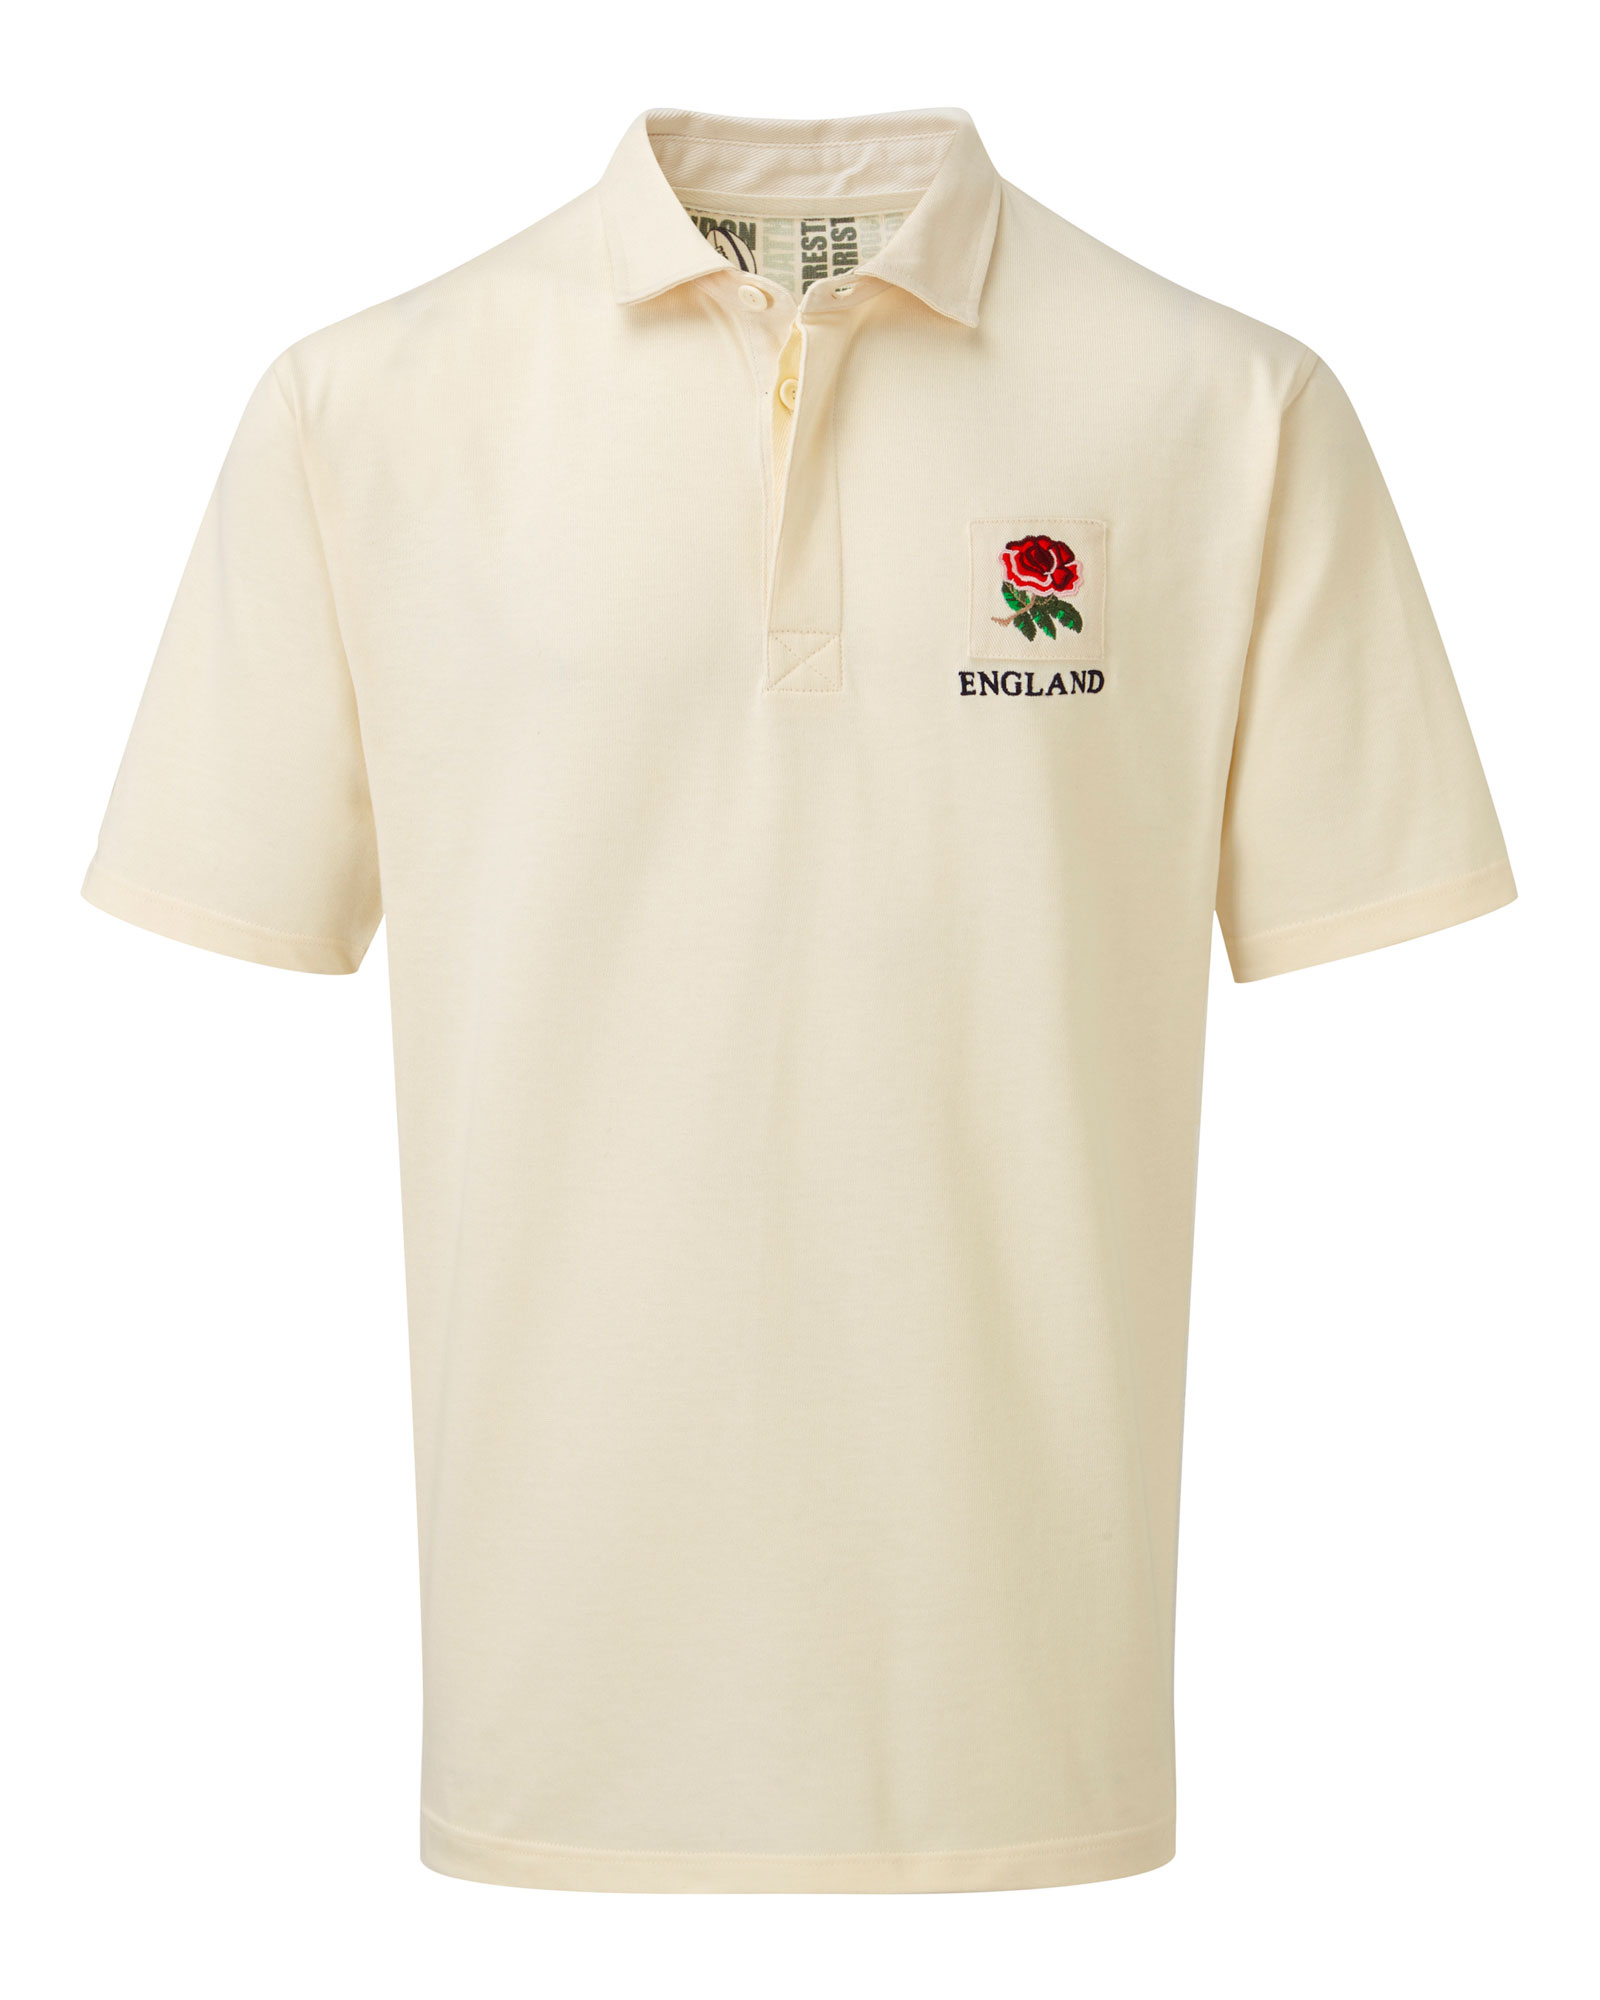 Short Sleeve England Classic Rugby Shirt At Cotton Traders